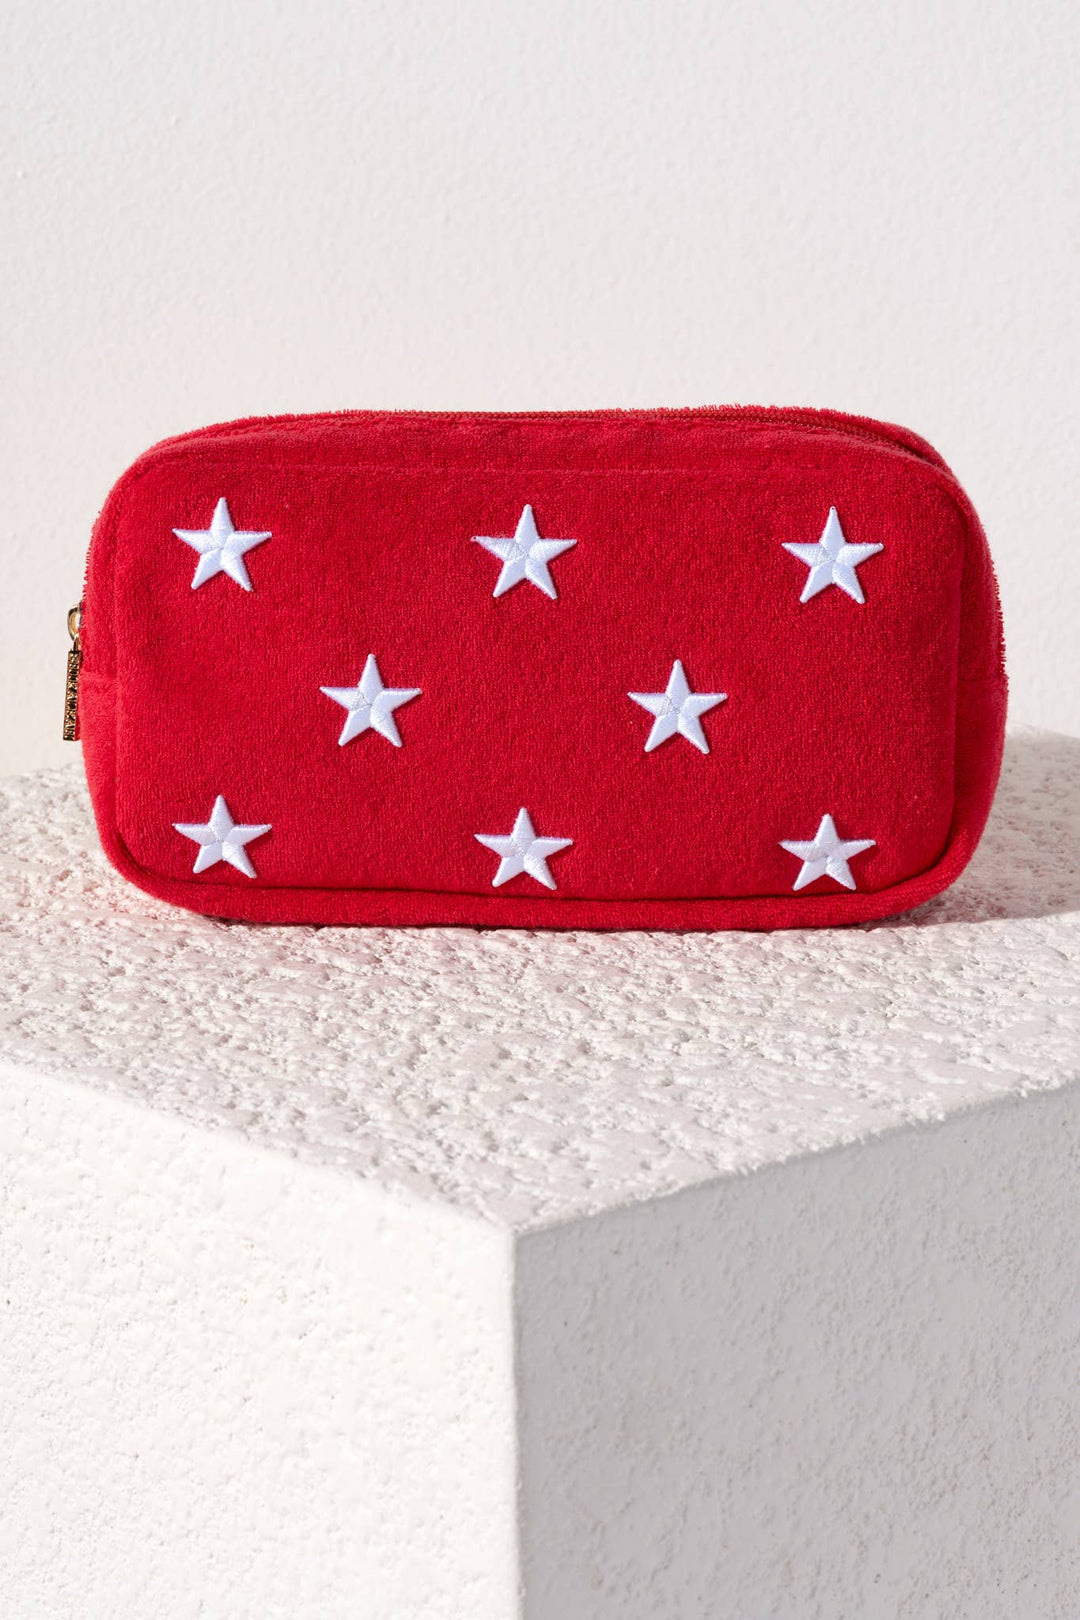 Sol Stars Zip Pouch: Red - Bloom and Petal